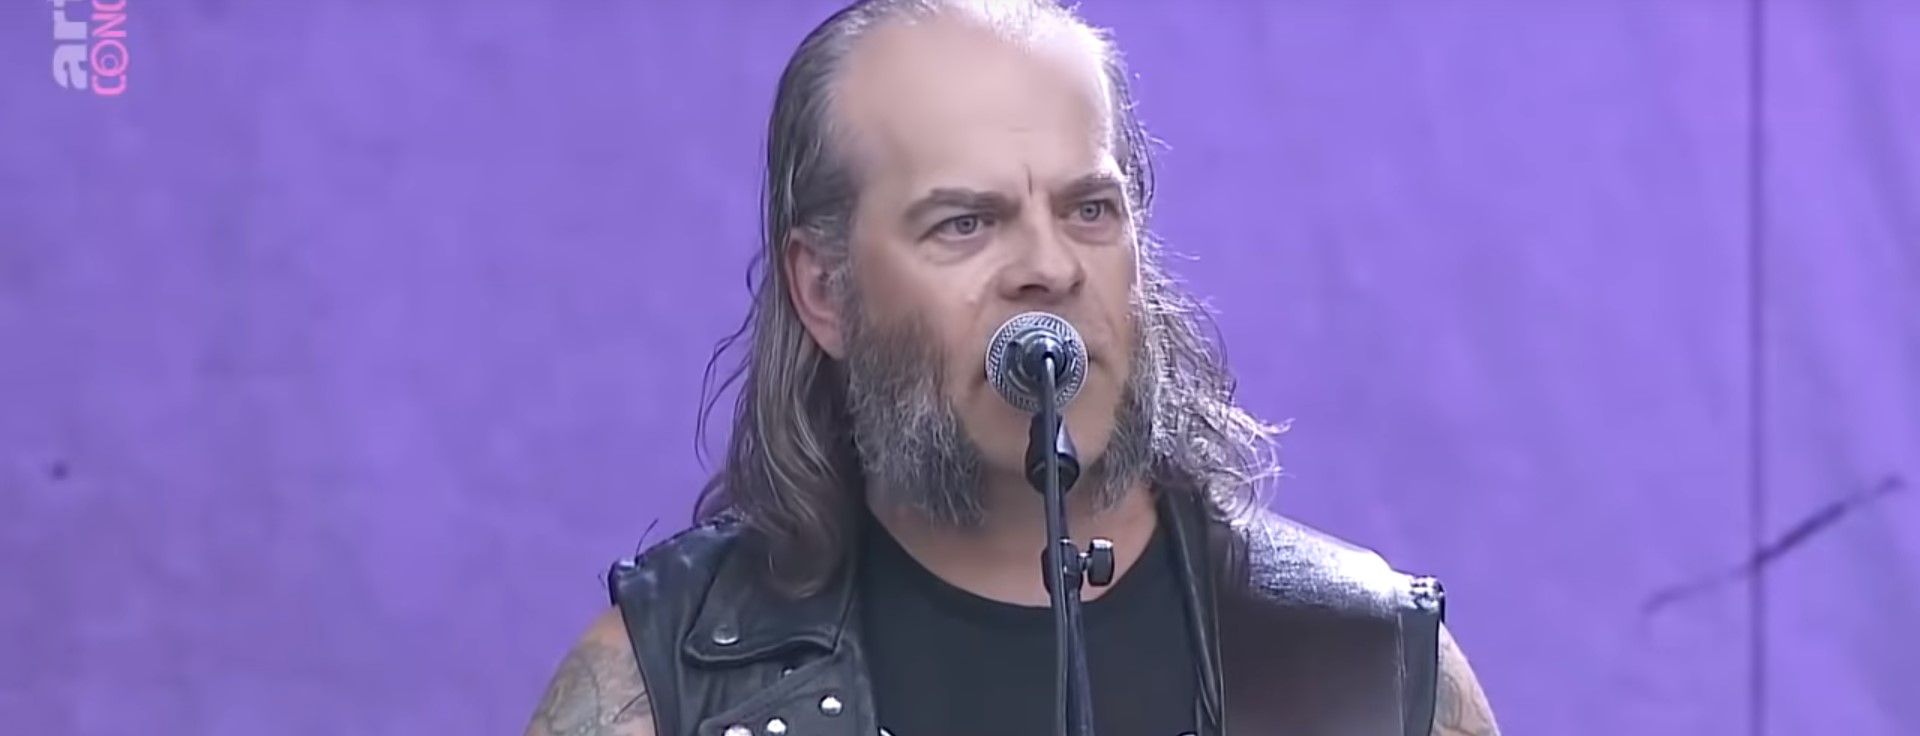 Grand Magus - Live At Summer Breeze 2019 (Full)